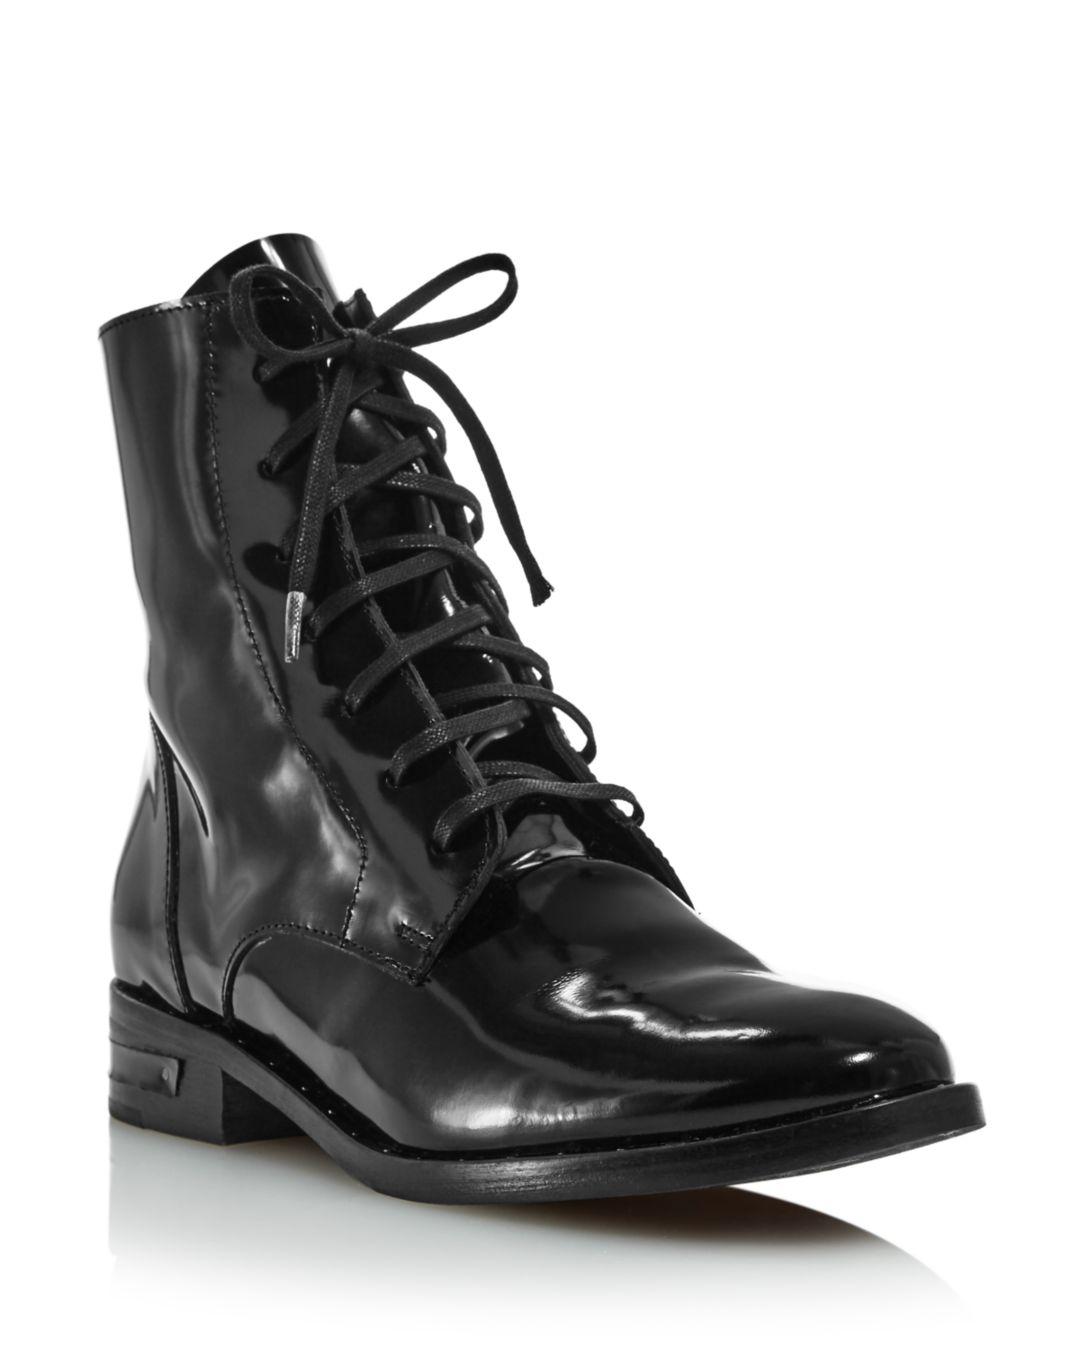 Lyst - Frēda Salvador Women's Patent-leather Combat Boots in Black